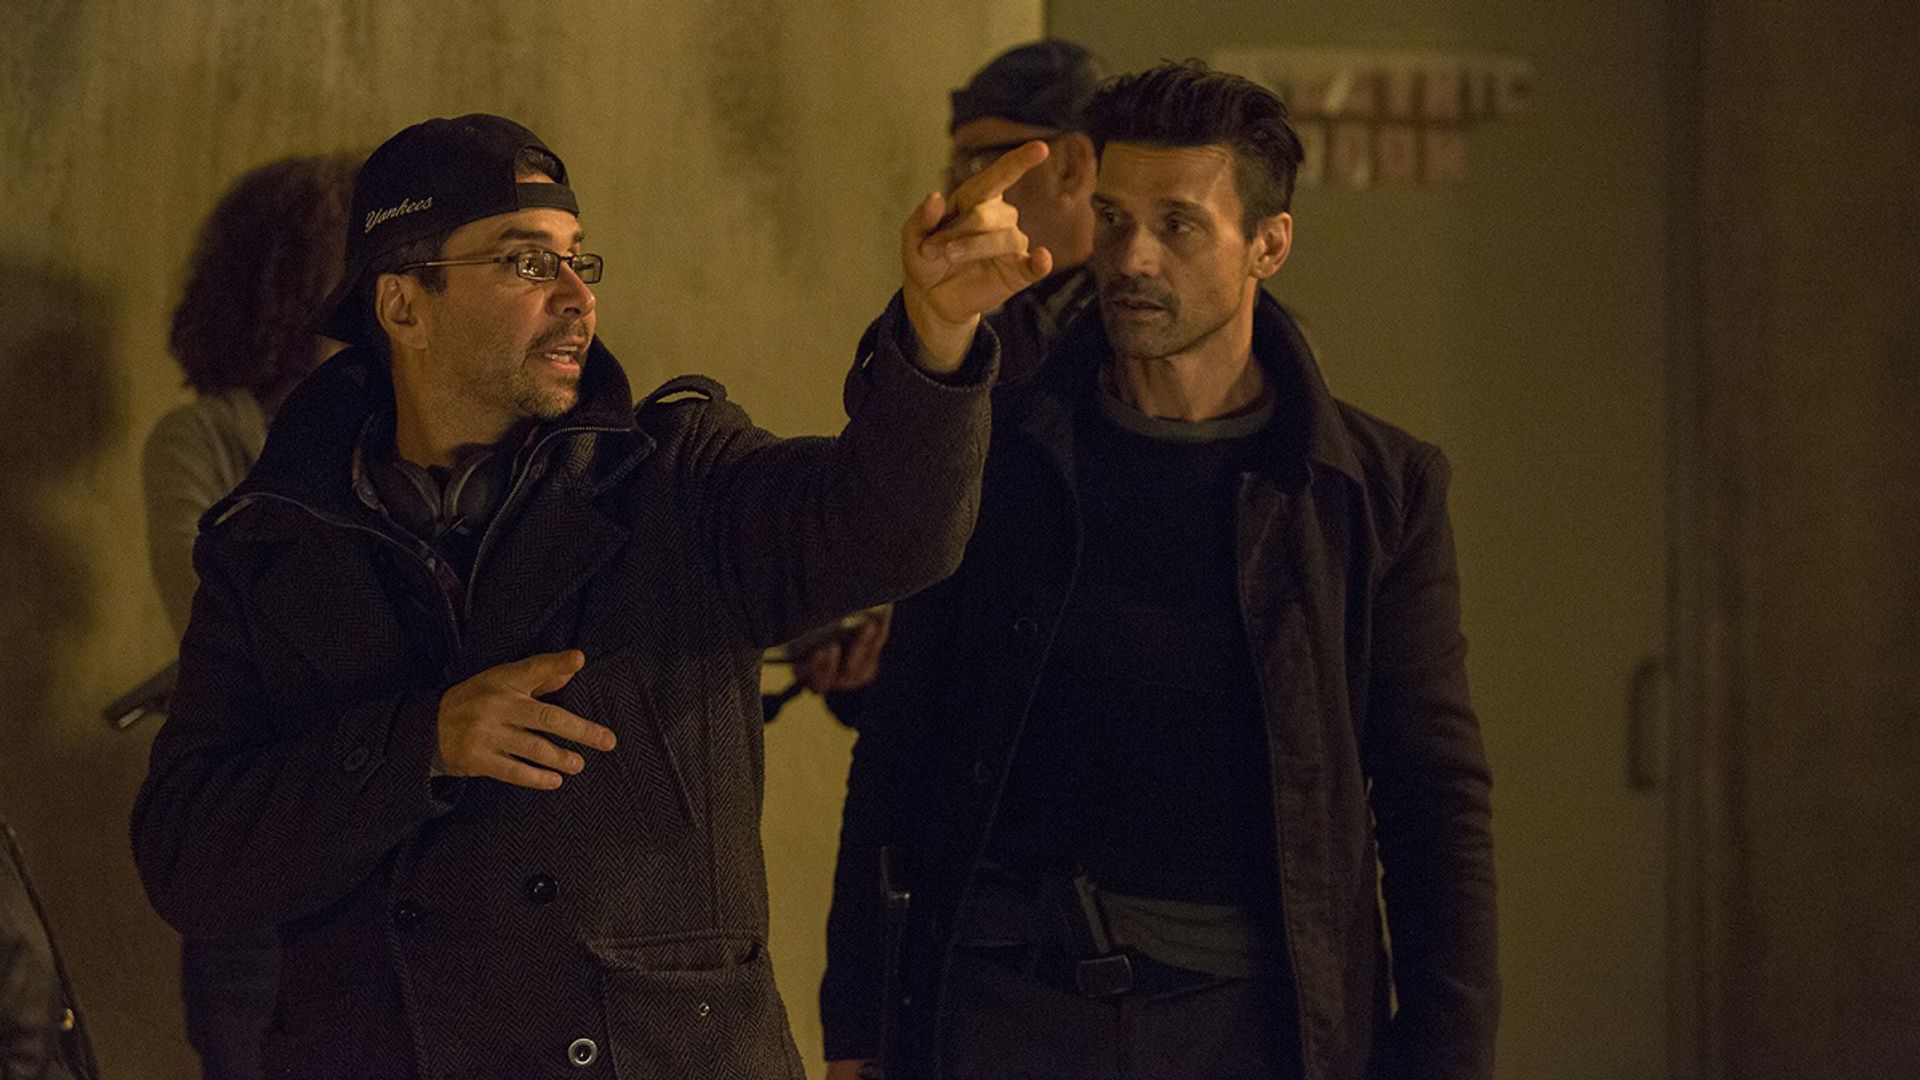 Frank Grillo on the set of the movie “The Purge: Anarchy”